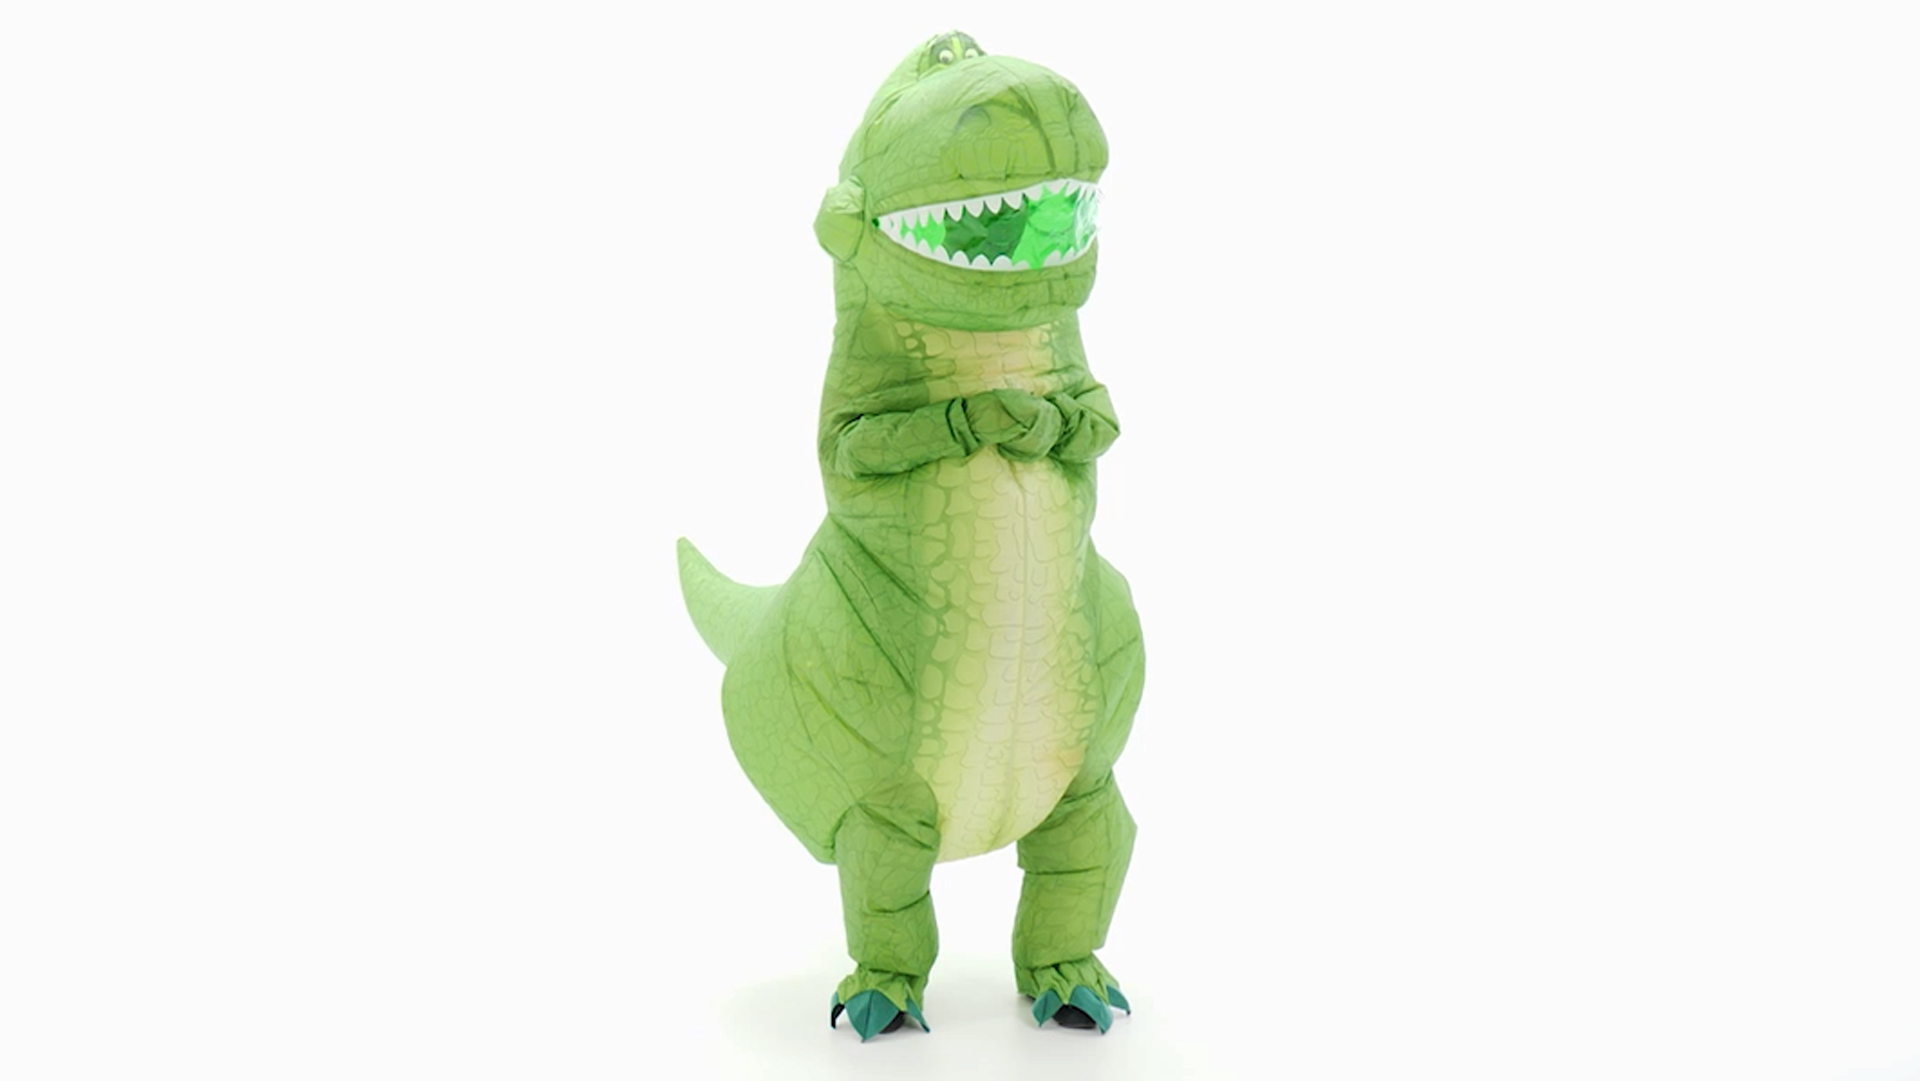 Bring back a classic character this Halloween when you wear this exclusive Toy Story Rex Inflatable Adult Costume.